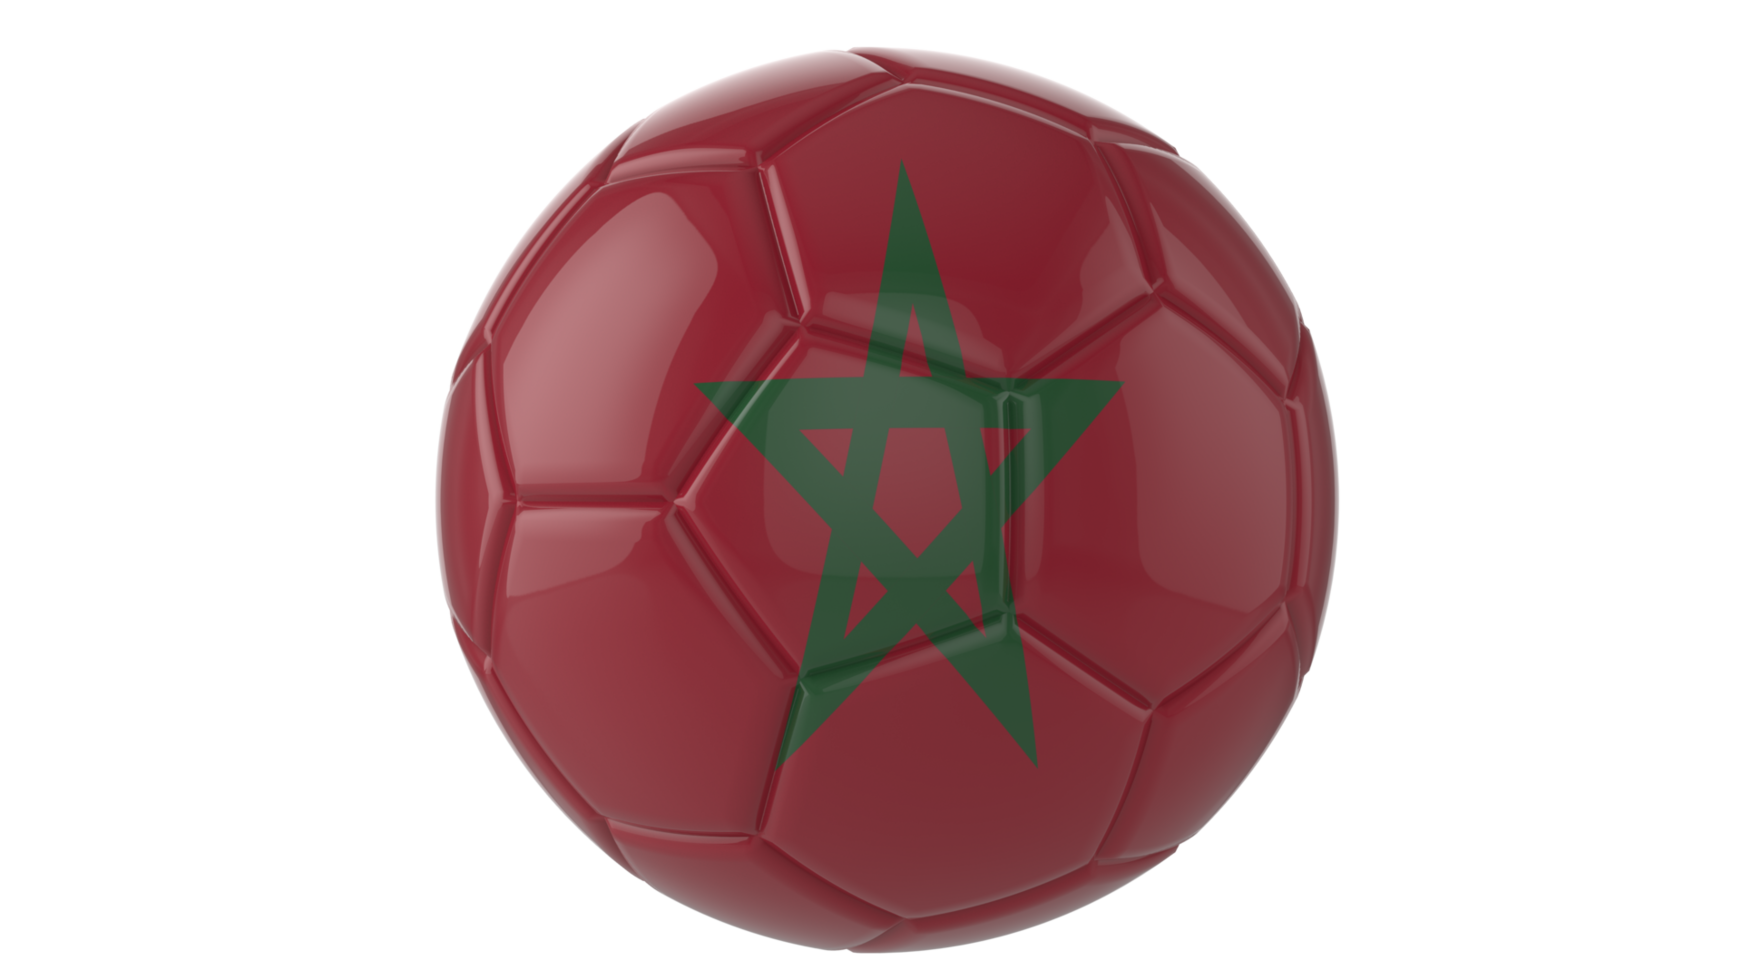 3d realistic soccer ball with the flag of Morocco on it isolated on transparent PNG background